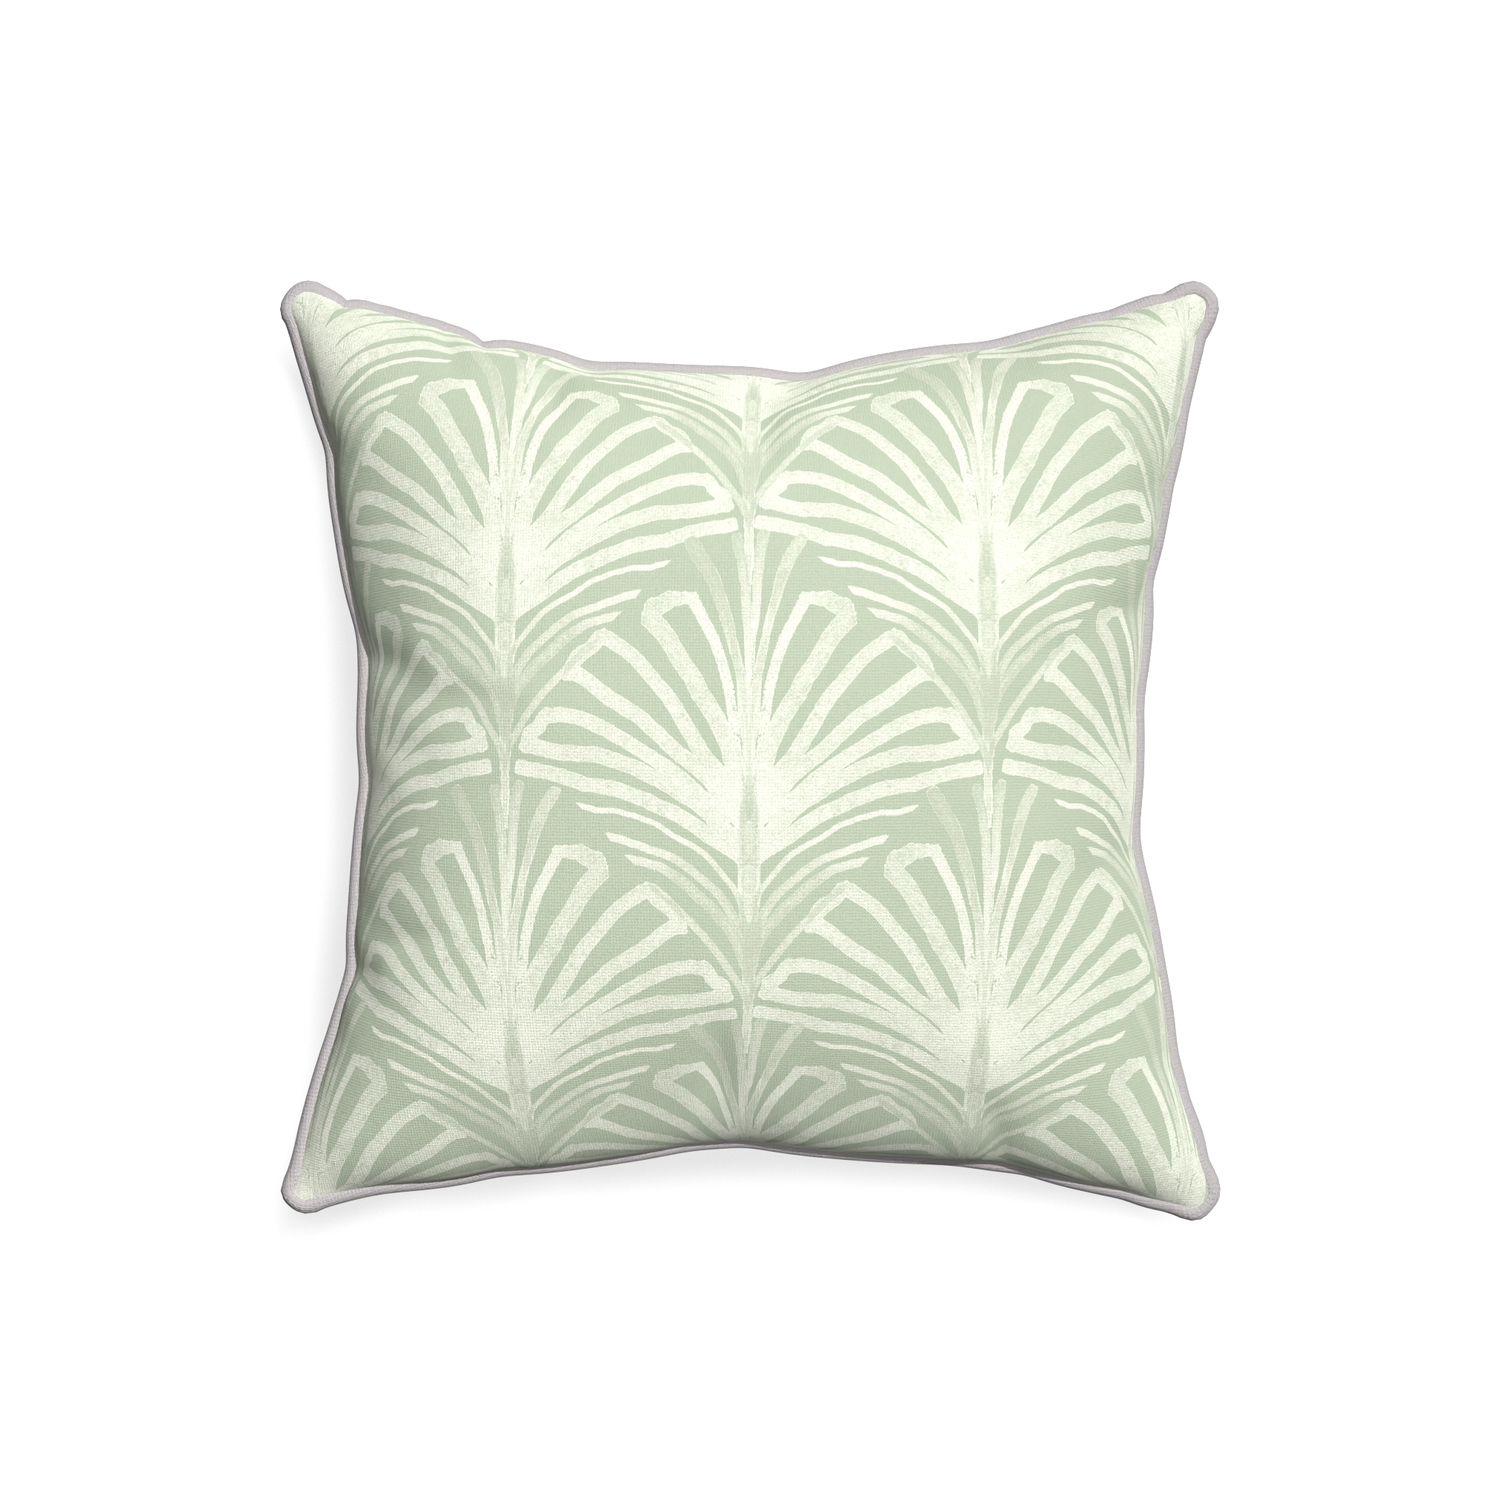 20-square suzy sage custom sage green palmpillow with pebble piping on white background